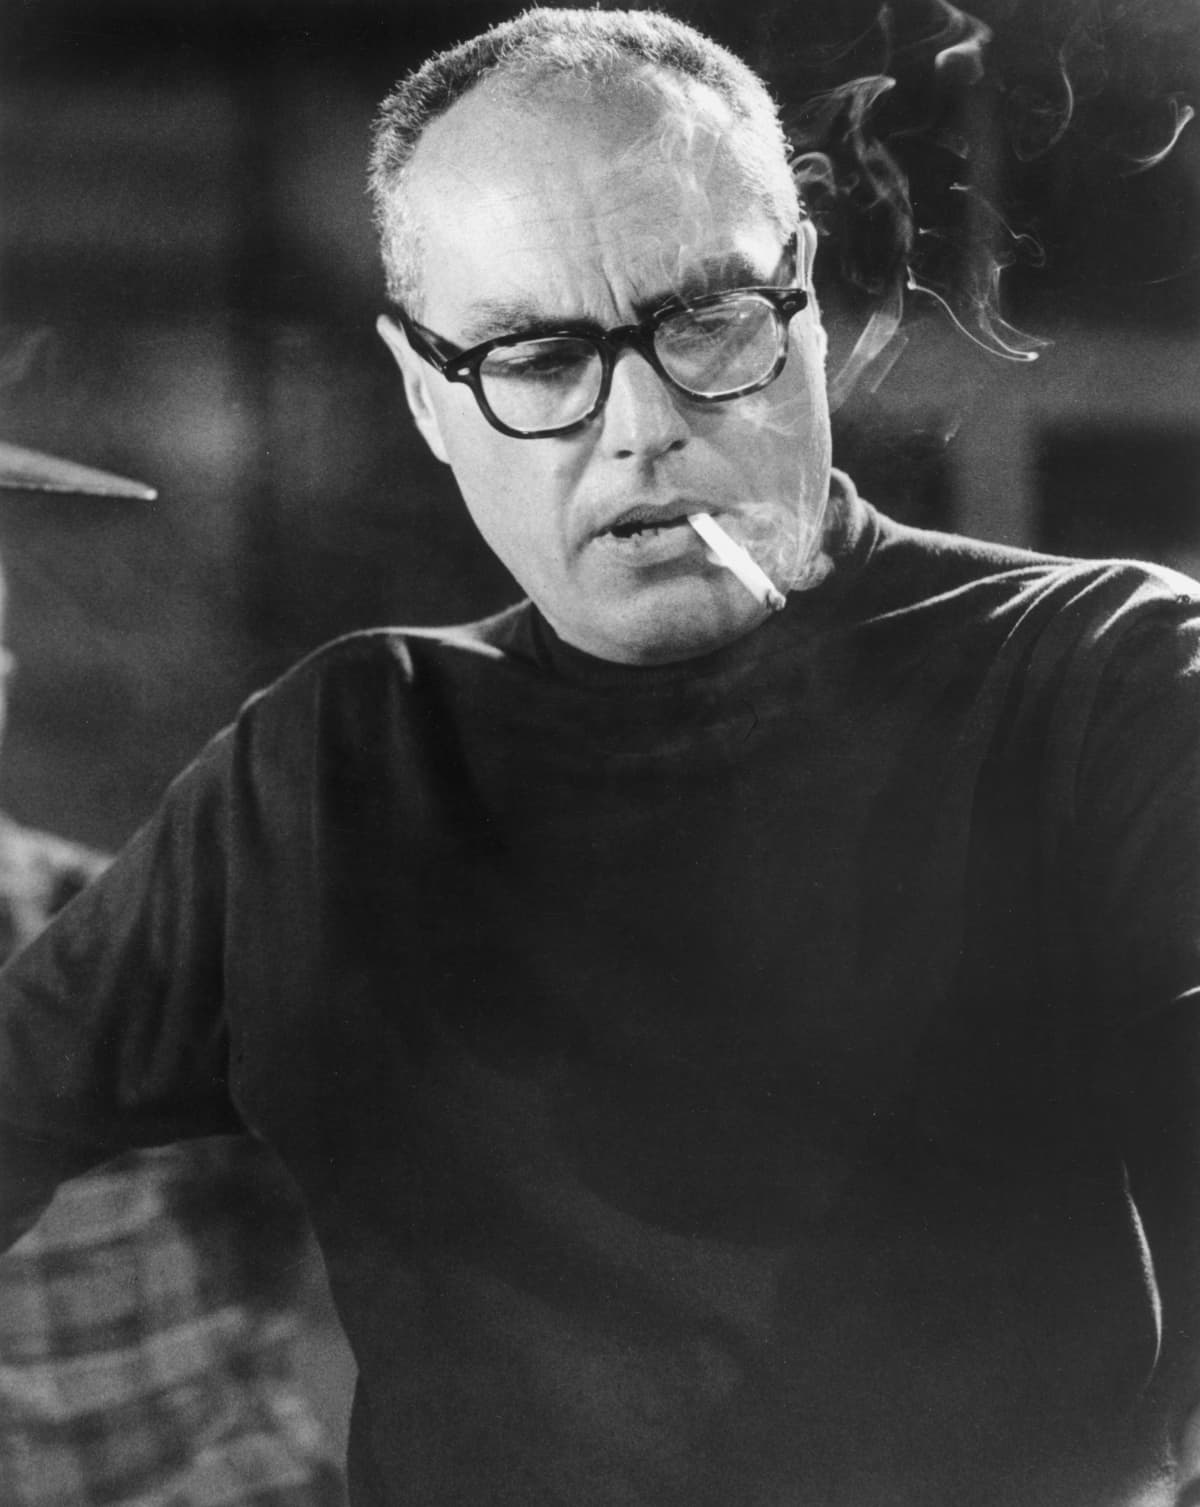 circa 1955:  Headshot of American film director John Sturges (1910 - 1992) wearing a black turtleneck and glasses with a cigarette dangling from his lips and smoke swirling up.  (Photo by Hulton Archive/Getty Images)